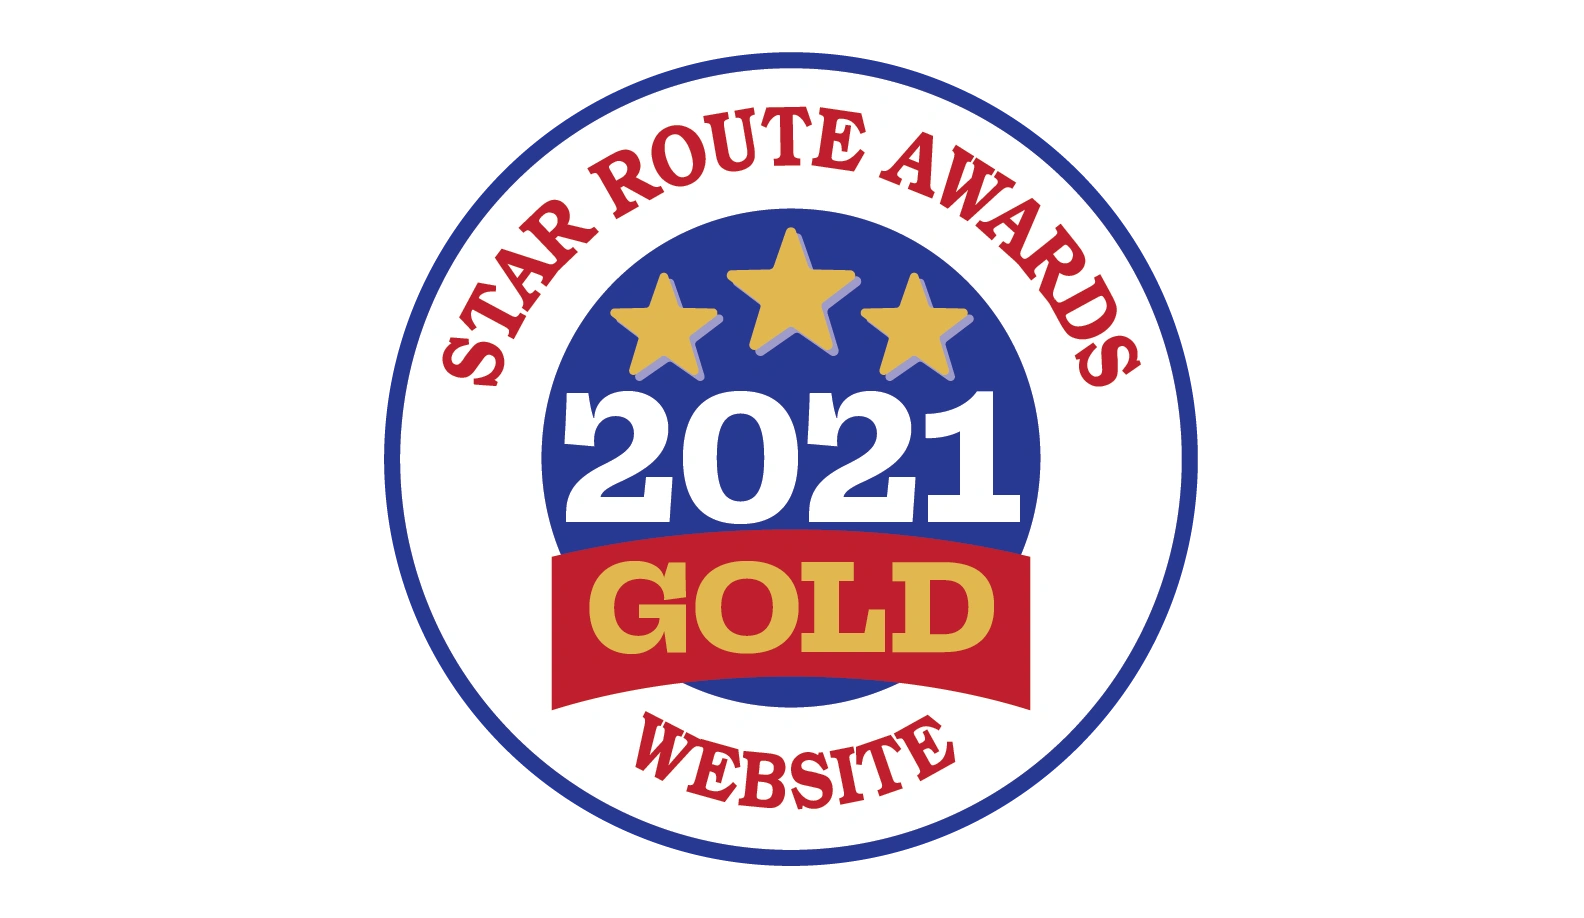 Star Route Awards 